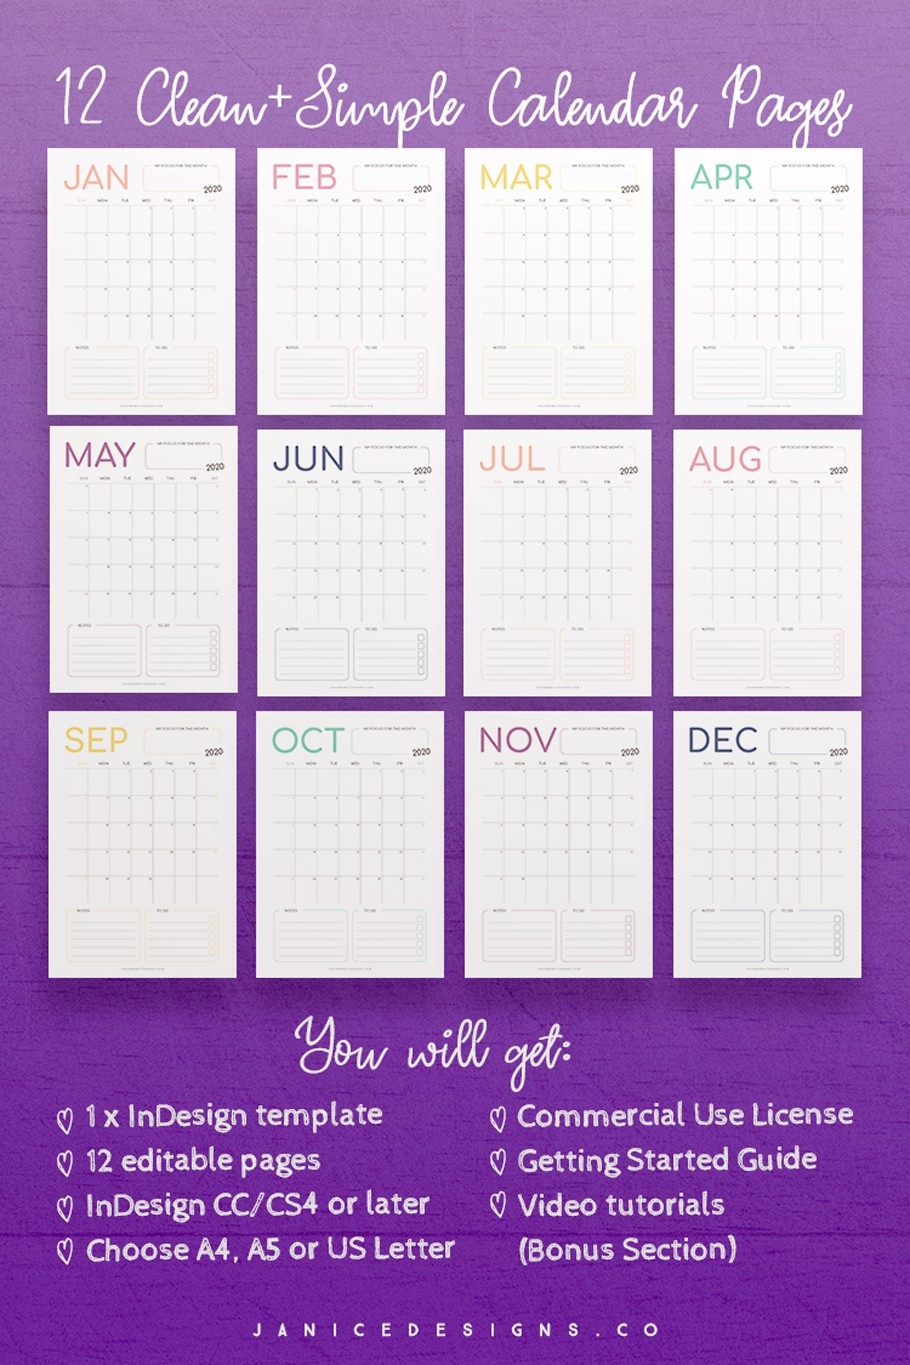 2020 Calendar Indesign Template For Commercial Use-Does Indesign Have A 2020 Calendar Template